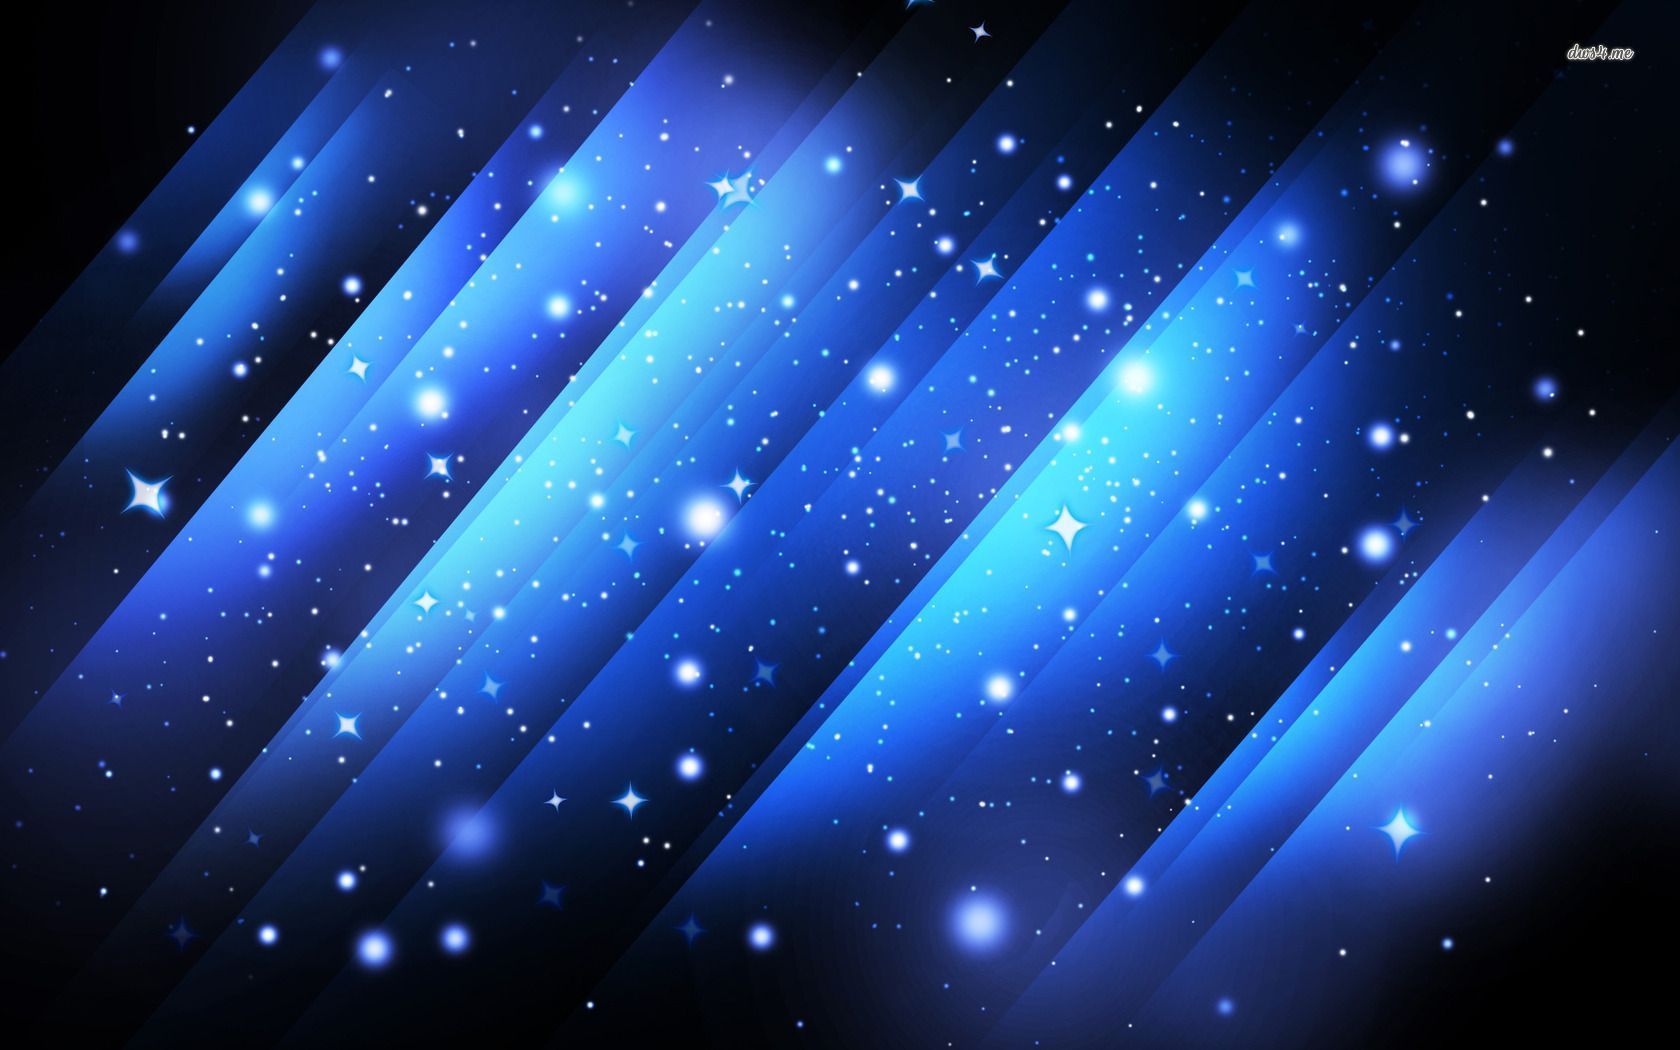 Light particles and stripes wallpaper - Abstract wallpapers - #3278